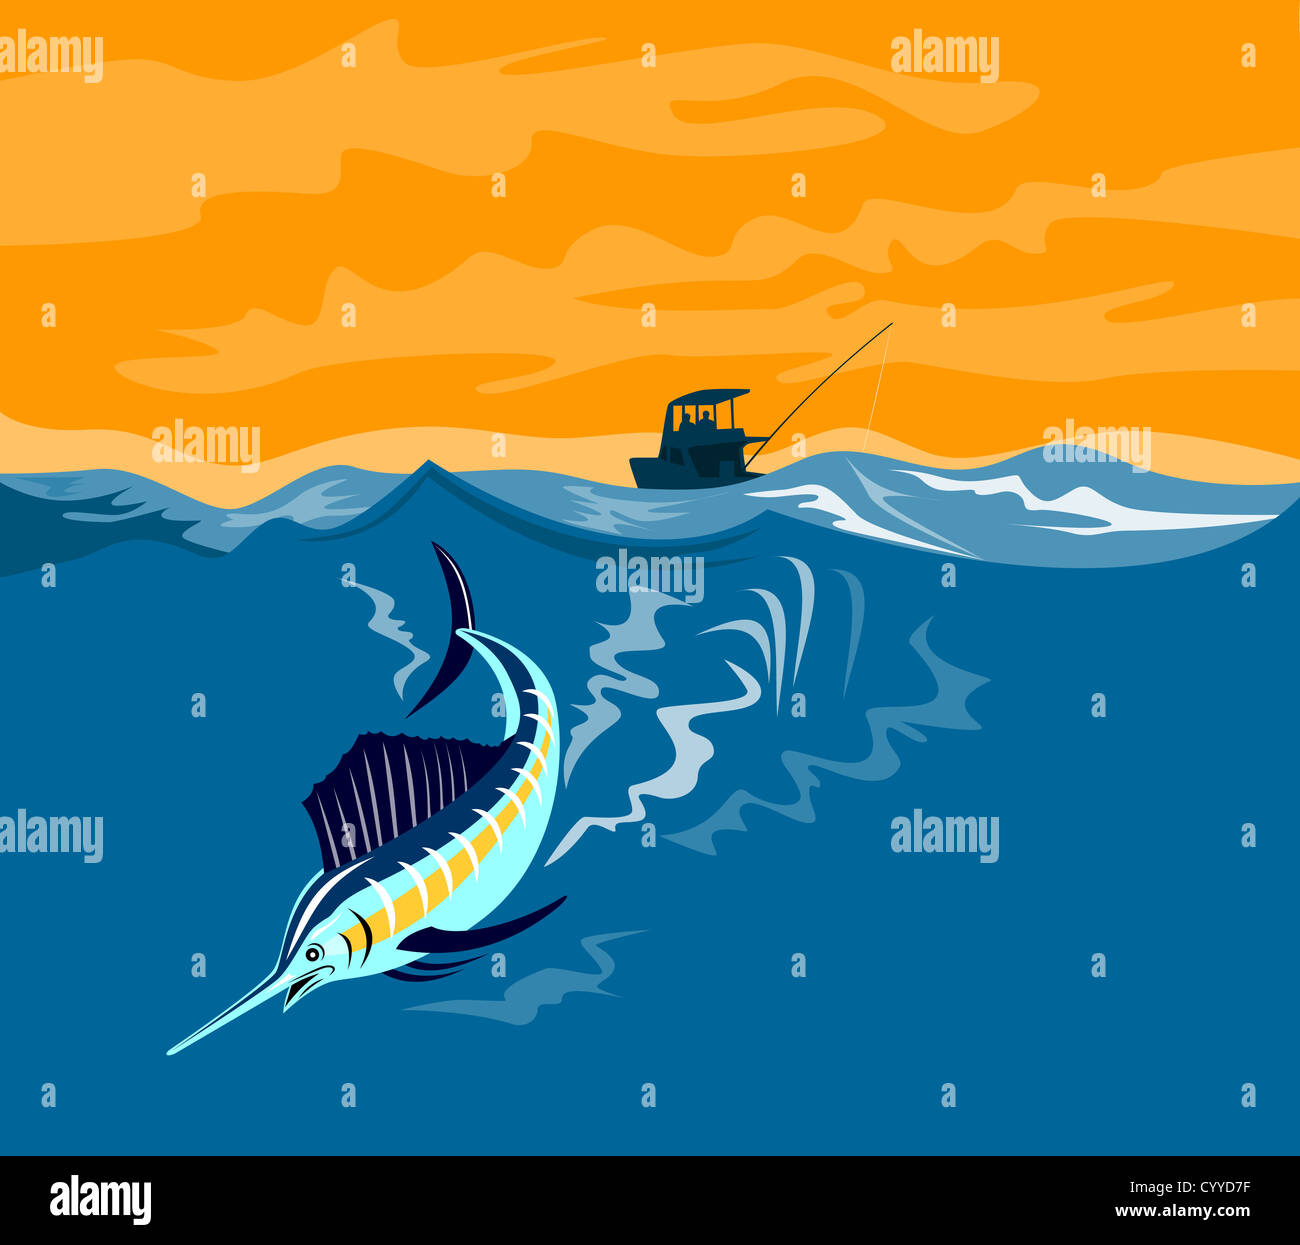 Illustration of a sailfish fish jumping with fishing boat in background done in retro style. Stock Photo